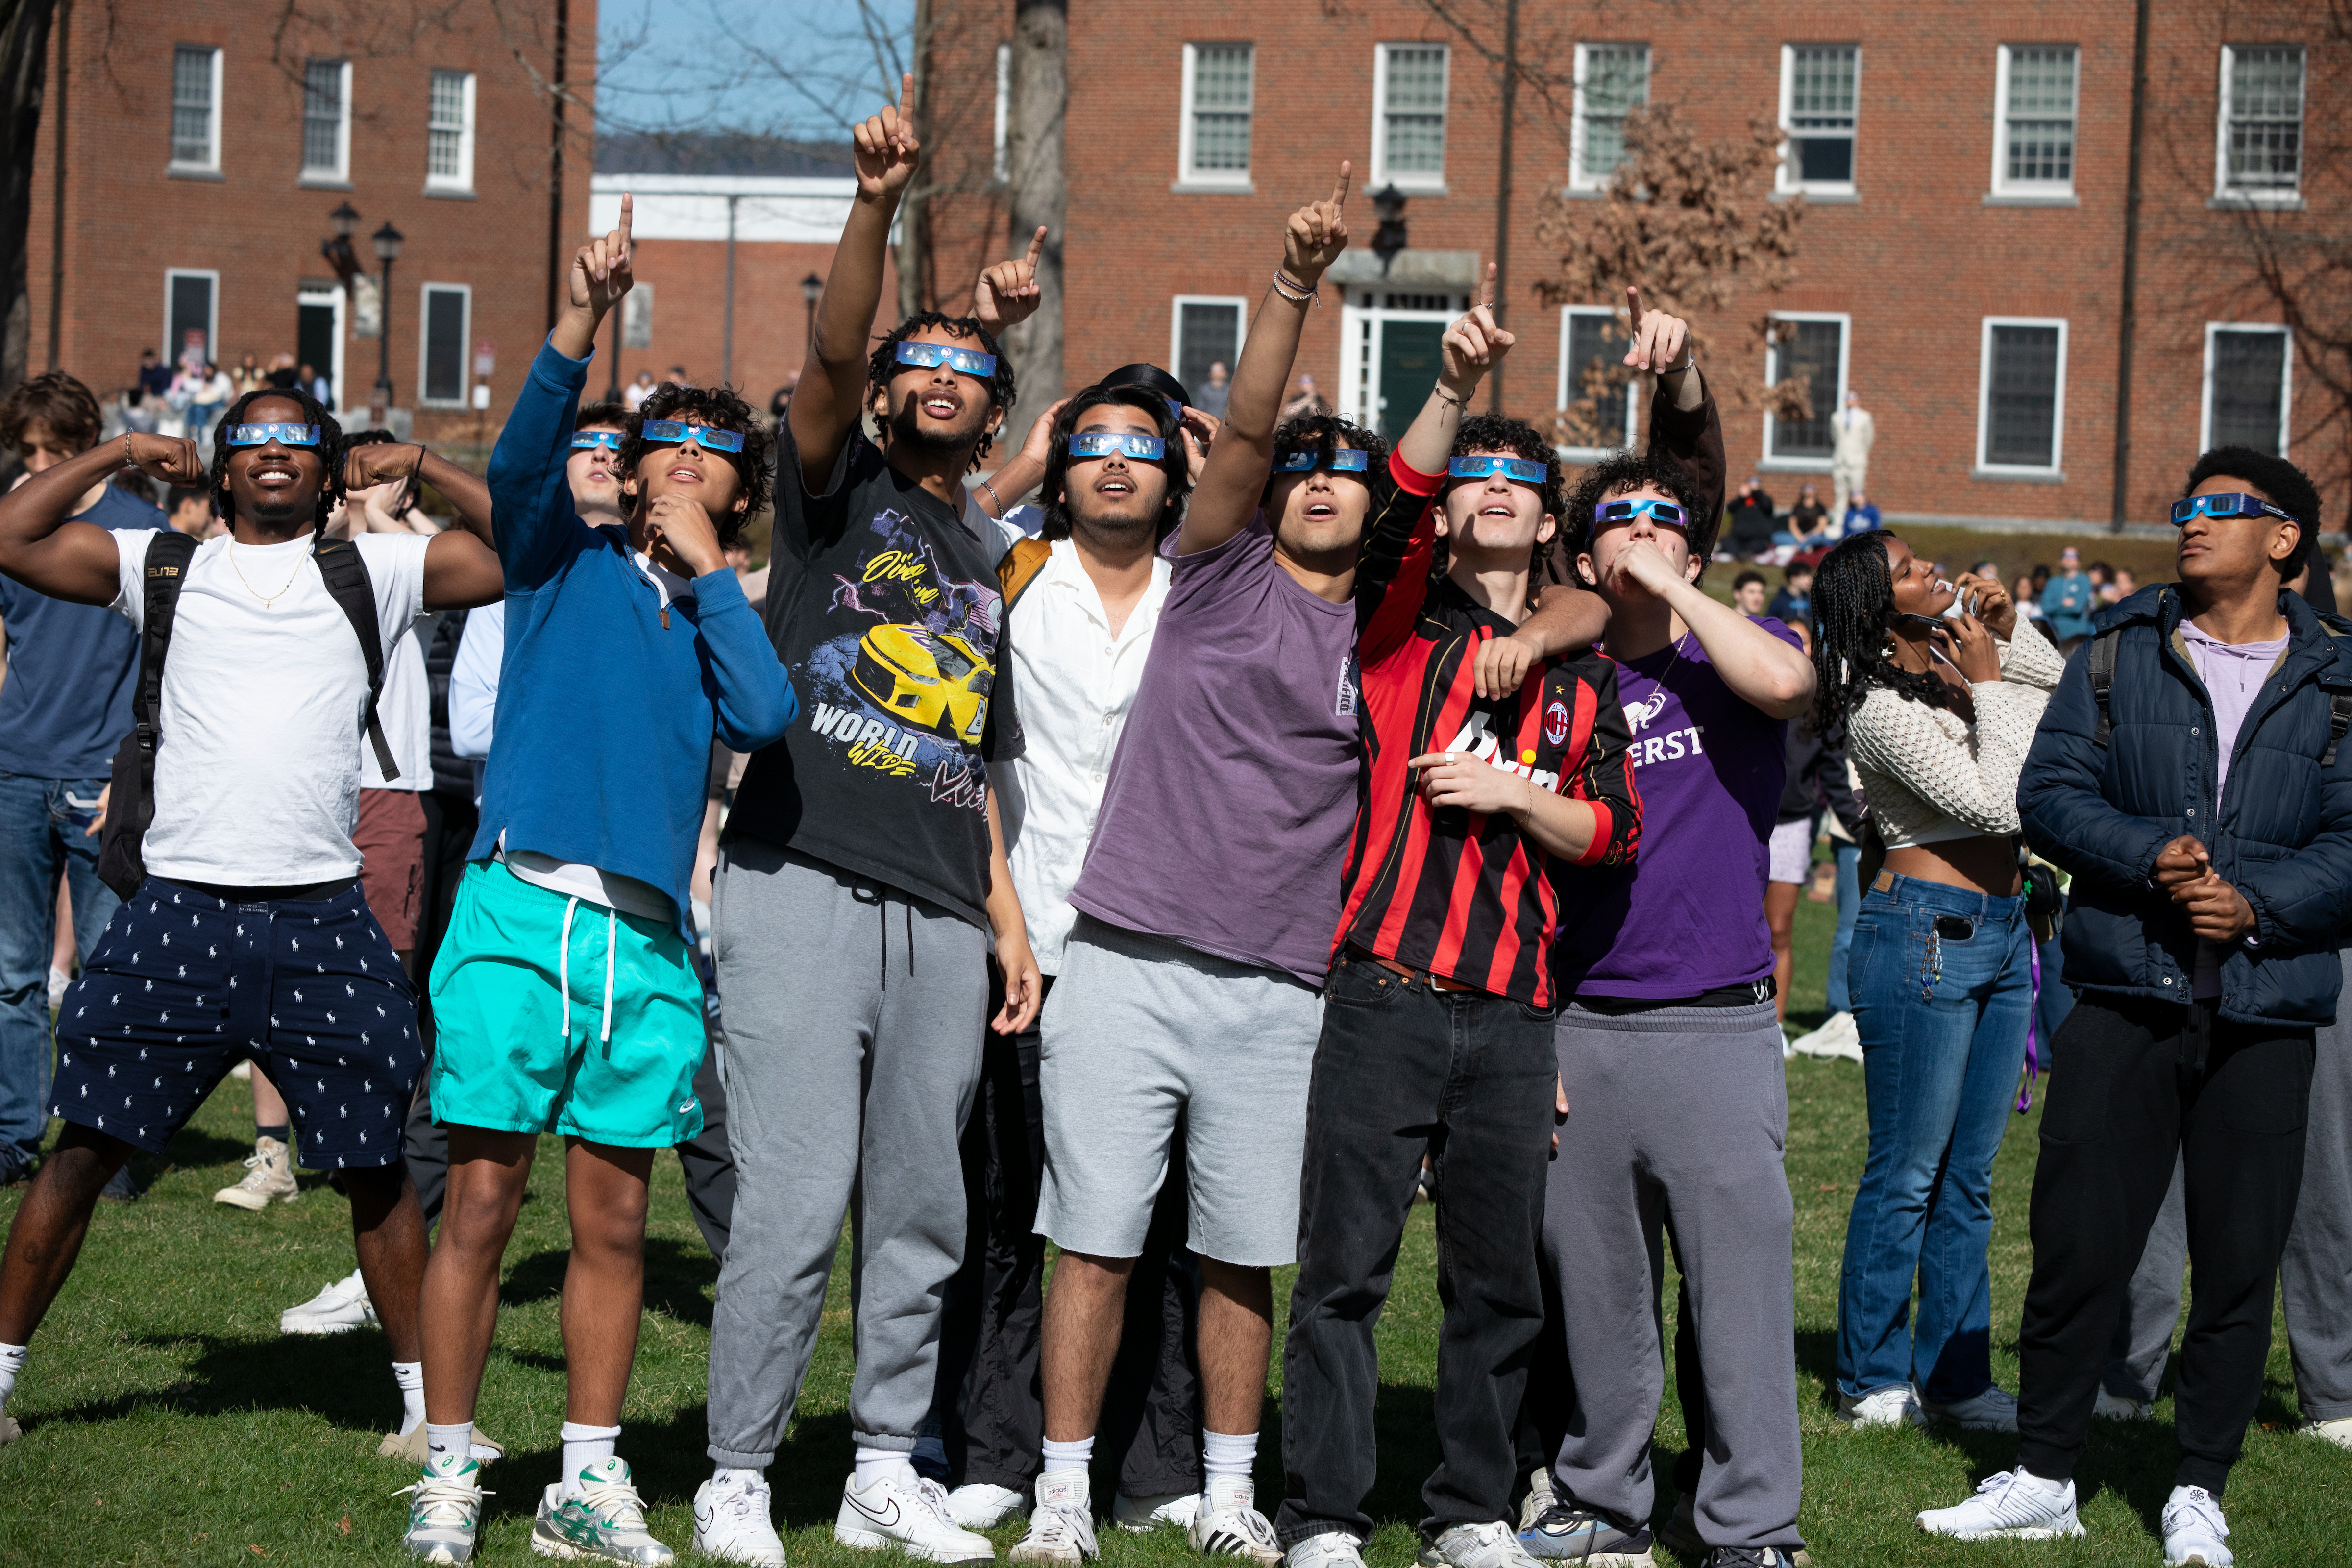 A group of people wearing eclipse glasses pointing at the sky.